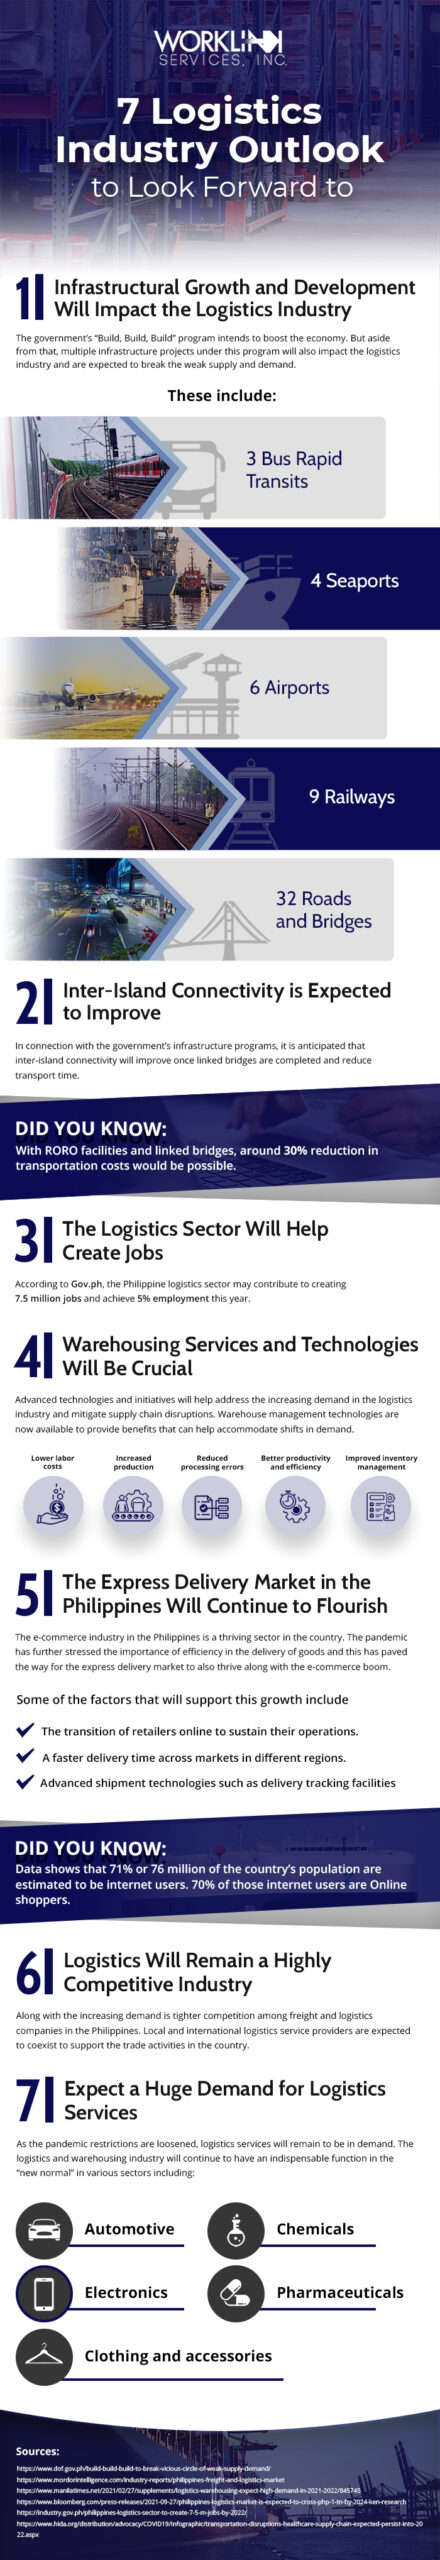 7 Logistics Industry Outlook to Look Forward to